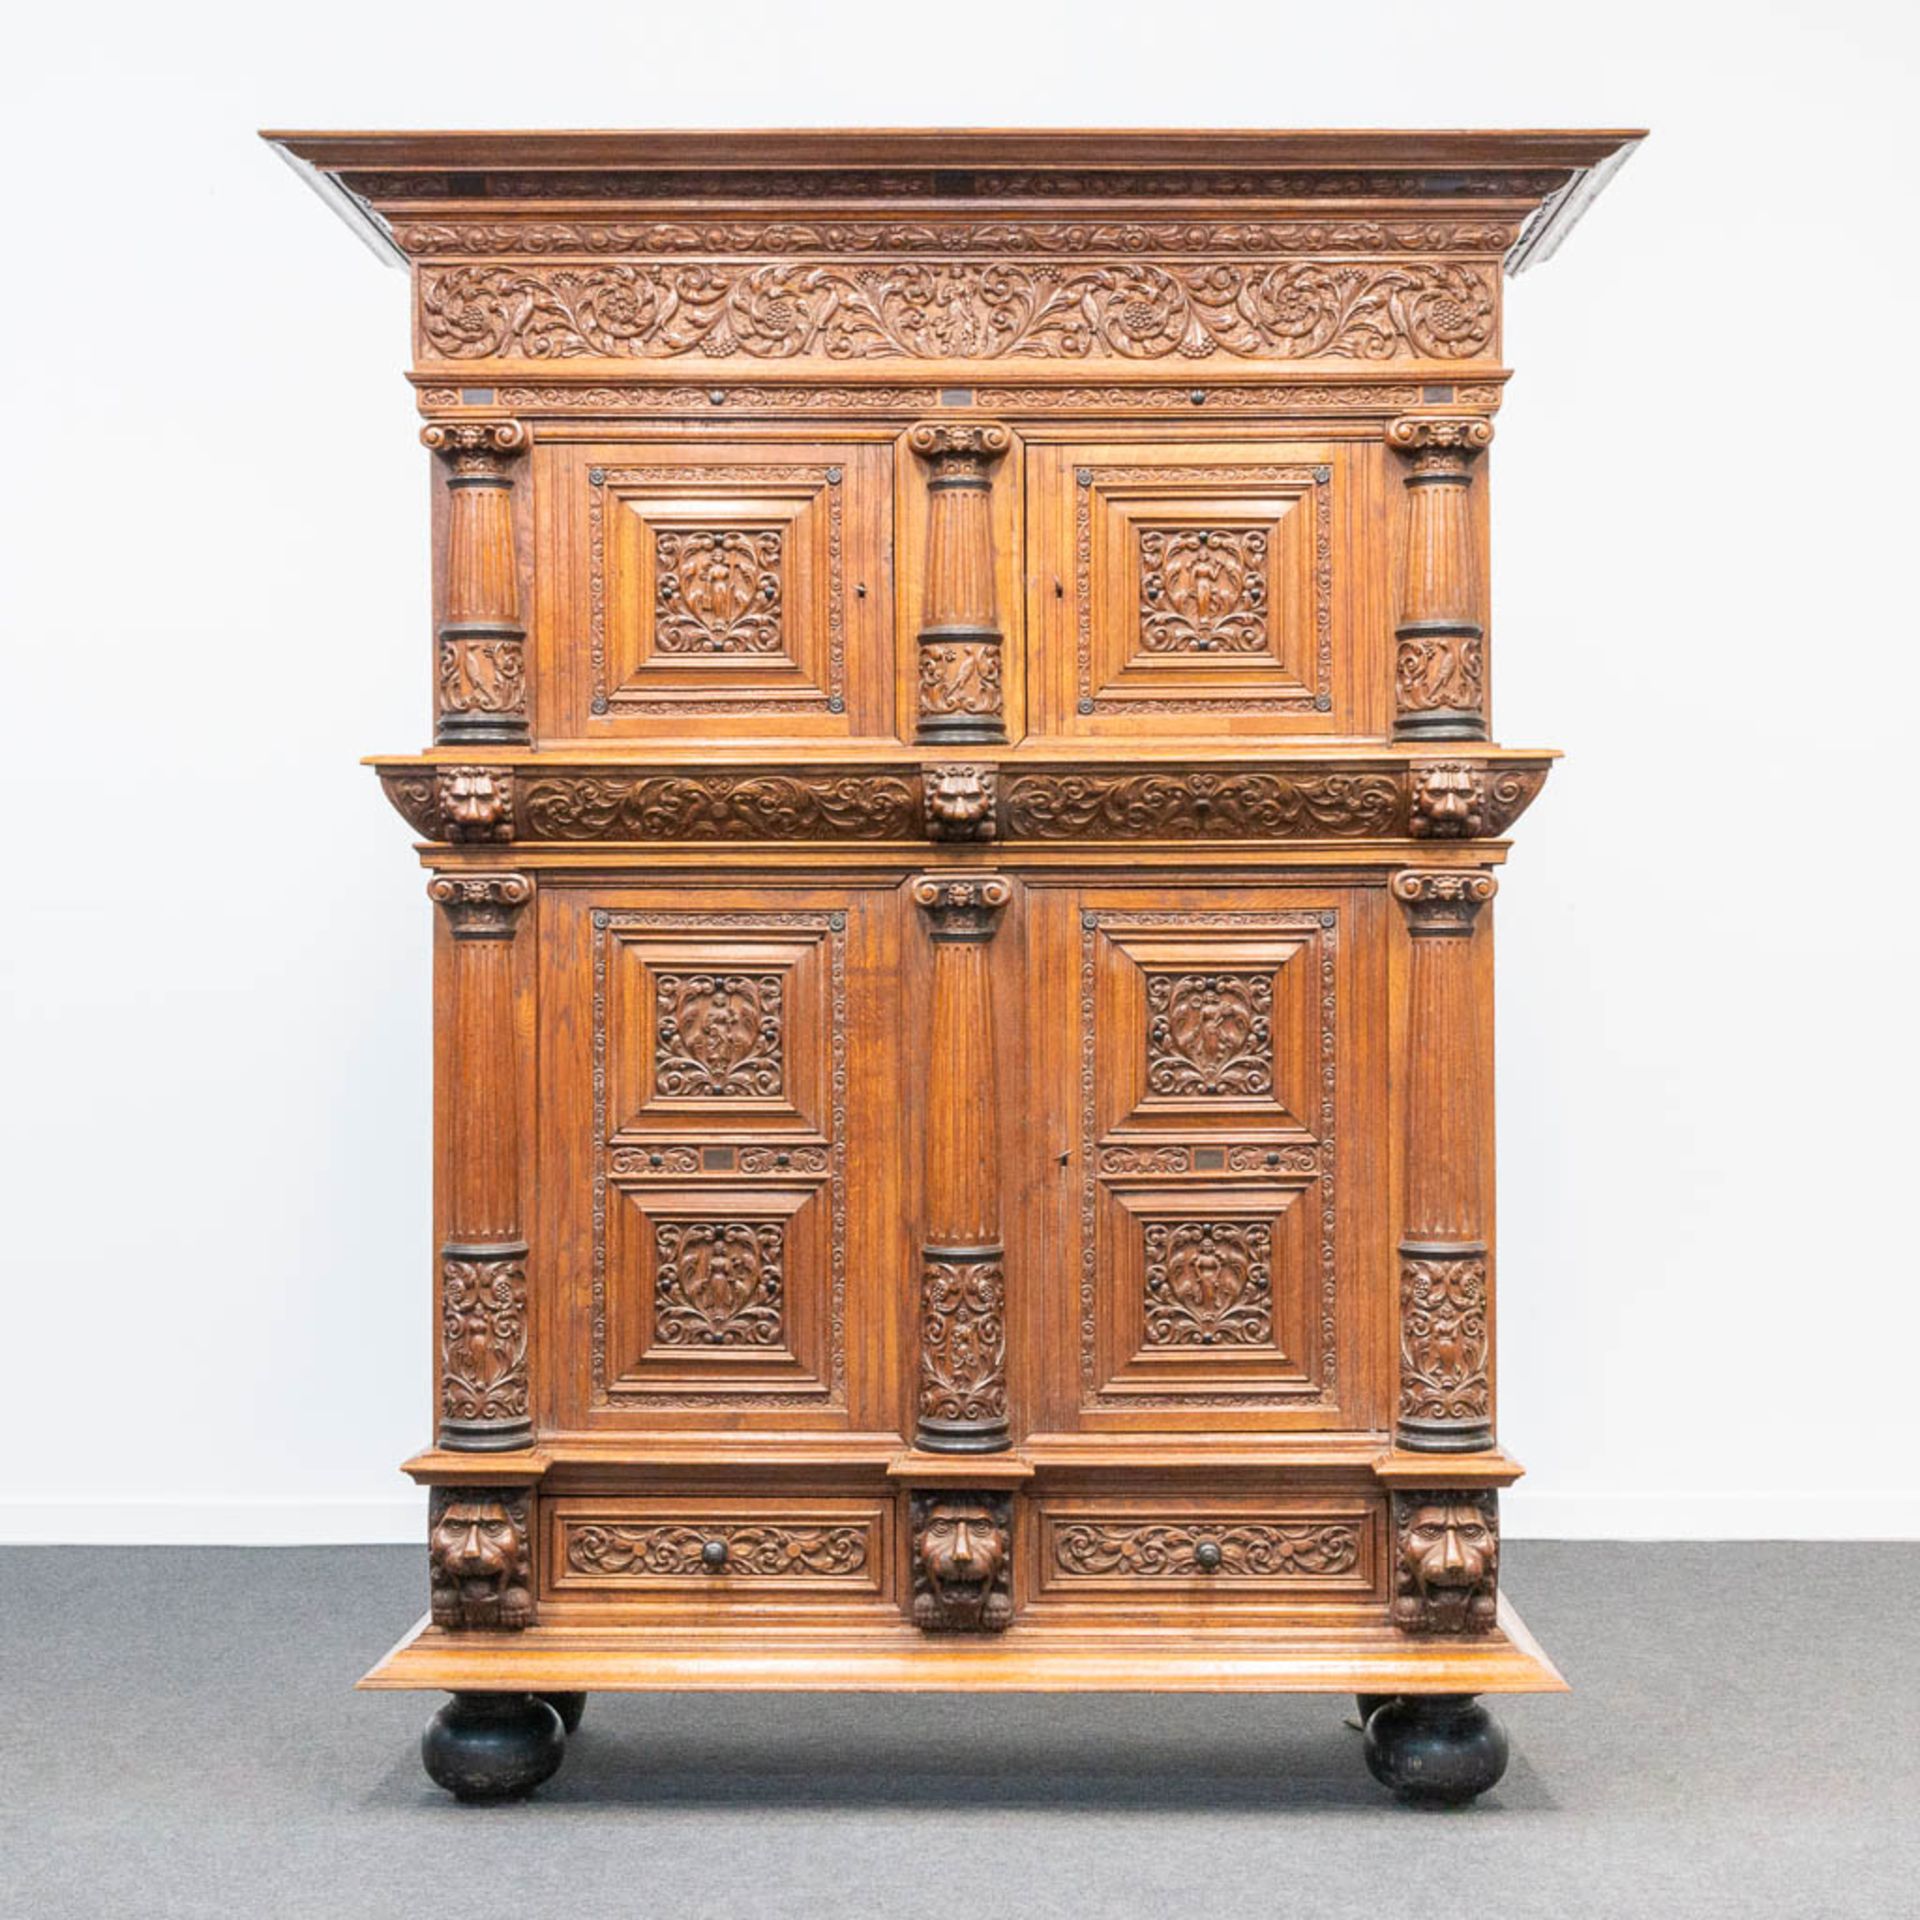 A cabinet, made in Flemish renaissance style, oak with fine sculptures, 19th century.